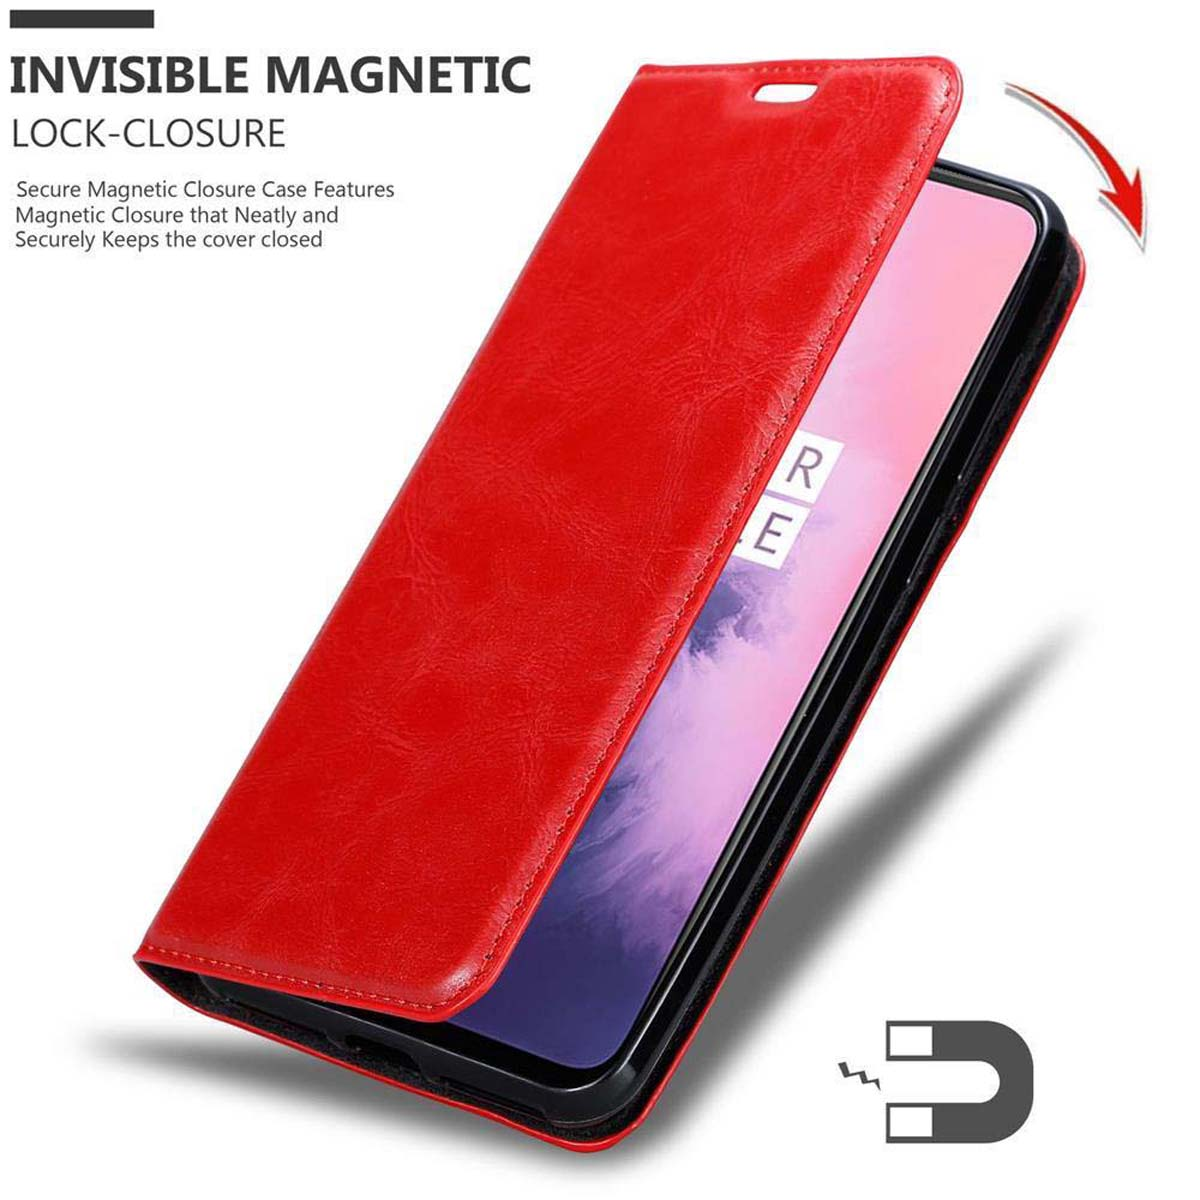 Magnet, CADORABO Invisible 6T, ROT Hülle Book APFEL OnePlus, Bookcover,